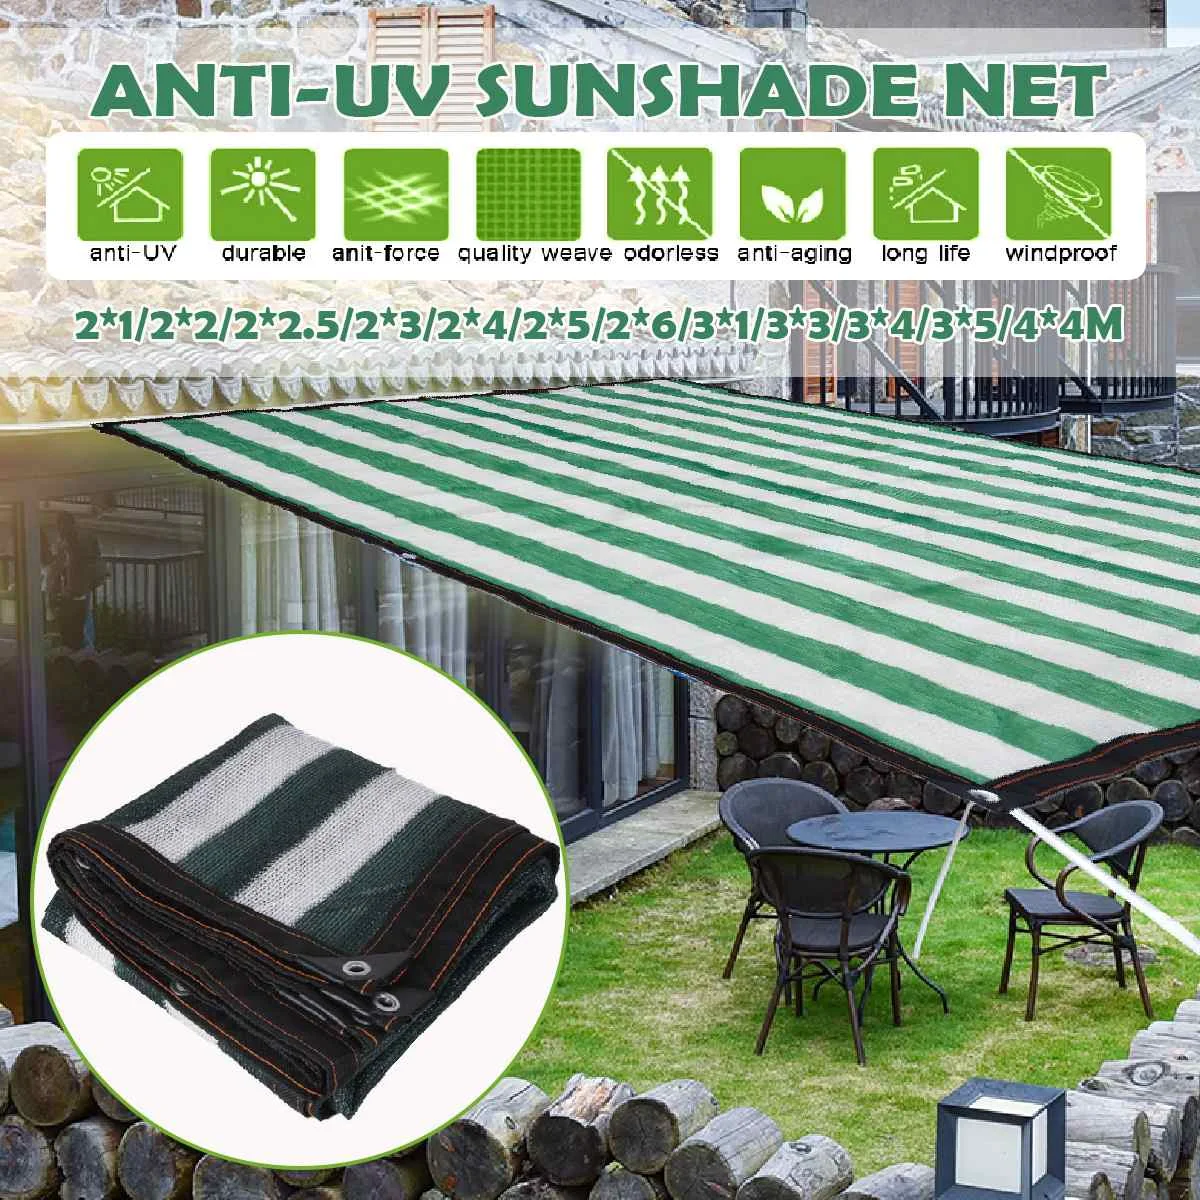 80% Sun Shade Sails Garden Awnings Net Shelter Sunshade Outdoor Car Cover Plant Greenhouse | Дом и сад